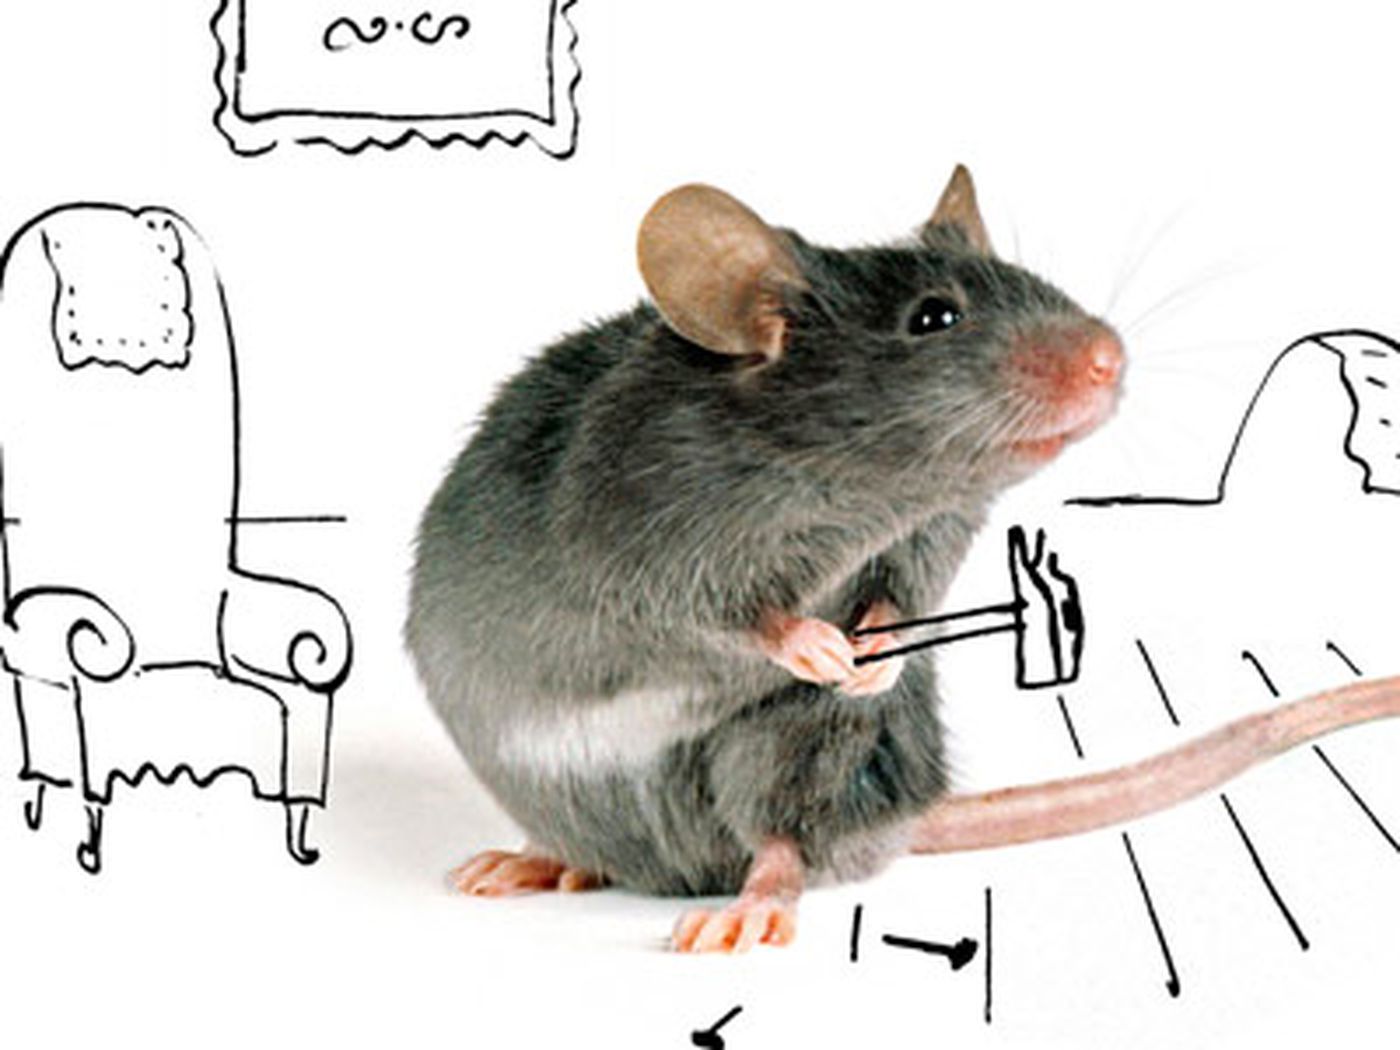 Rat Infestation Problems and Solutions